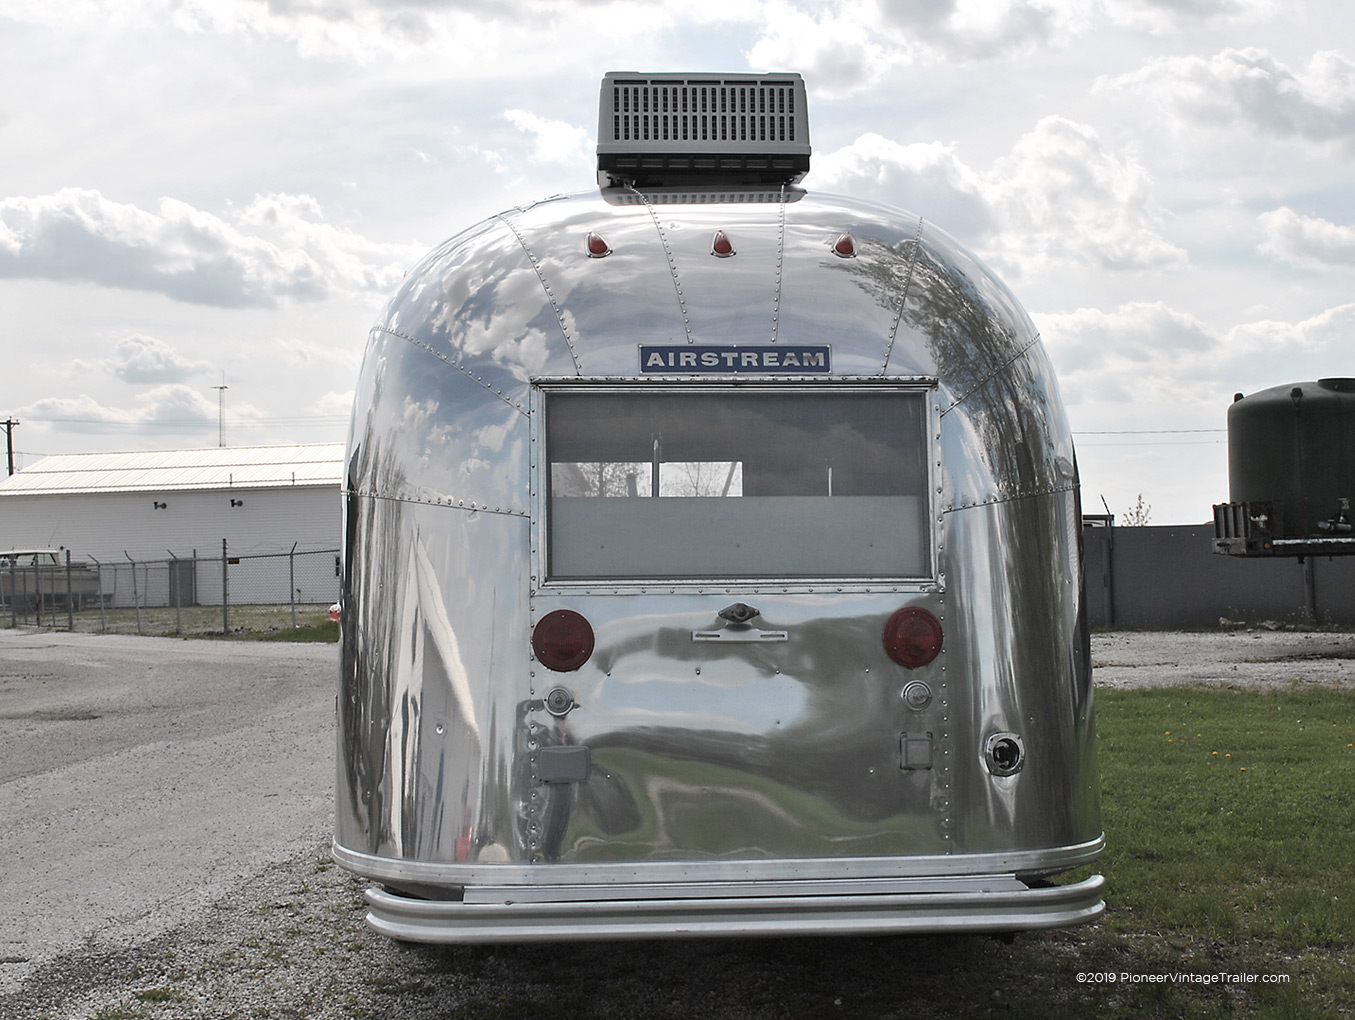 Airstream 62 Globetrotter rear view